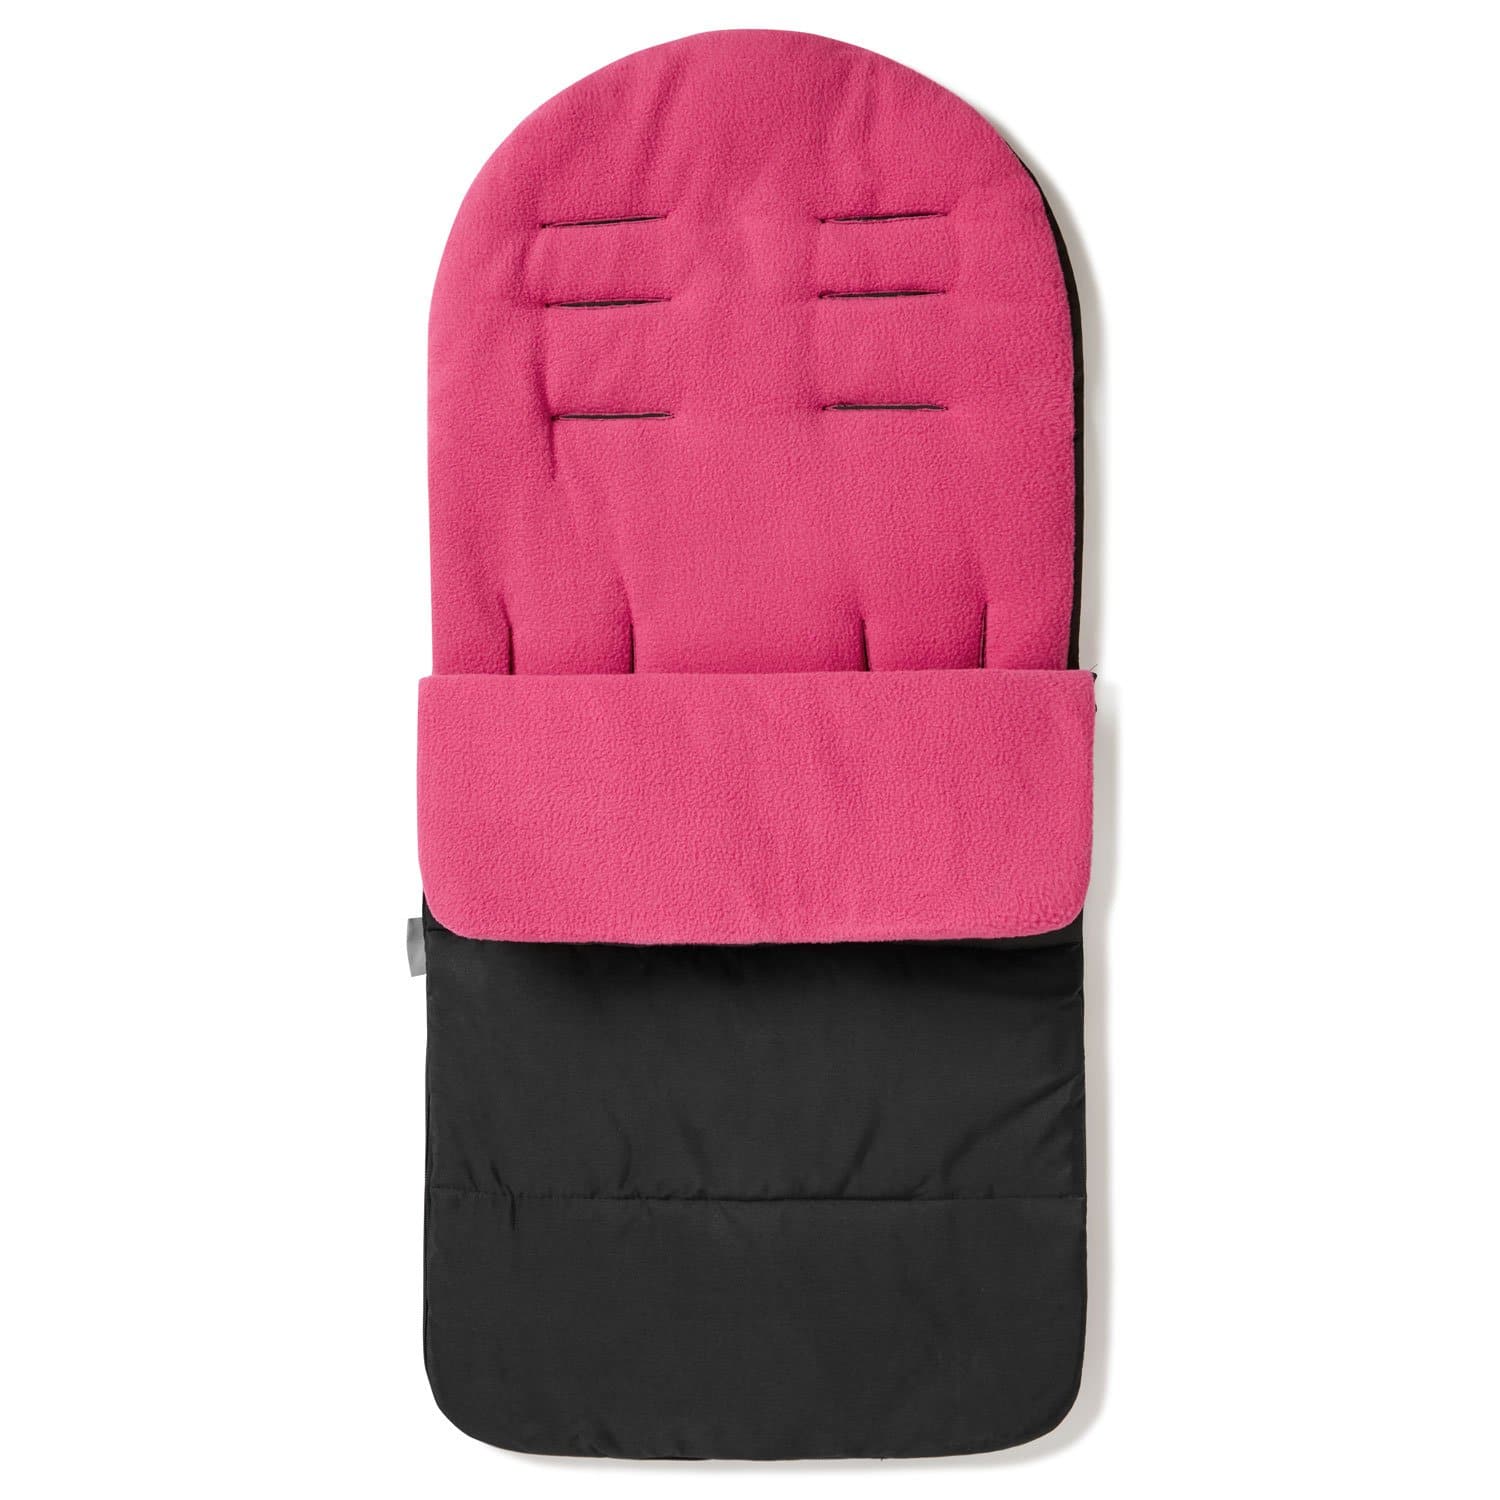 Premium Footmuff / Cosy Toes Compatible with Orbit Baby - Pink Rose / Fits All Models | For Your Little One